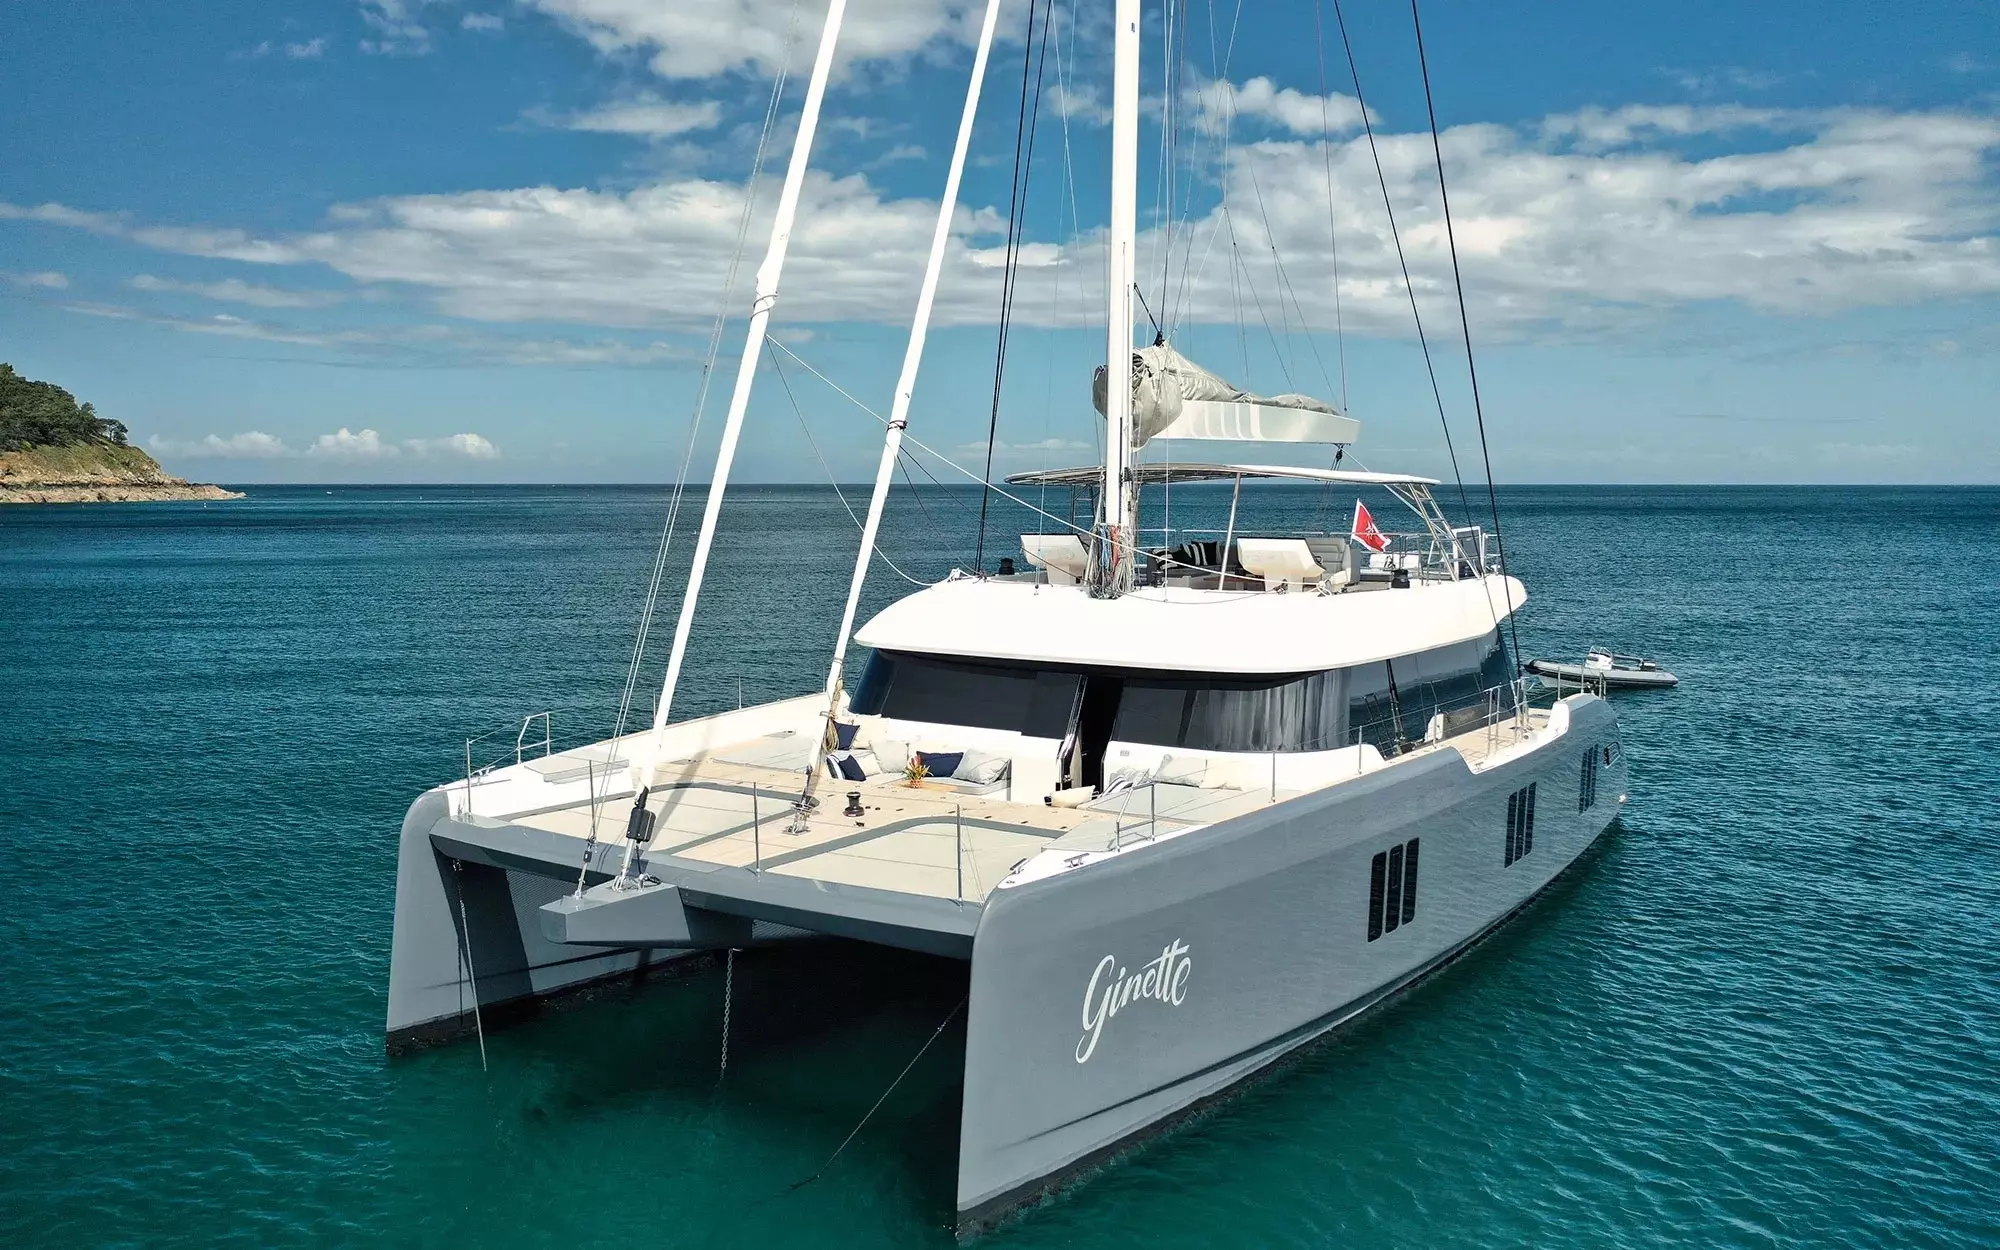 Ginette by Sunreef Yachts - Special Offer for a private Luxury Catamaran Charter in Gold Coast with a crew